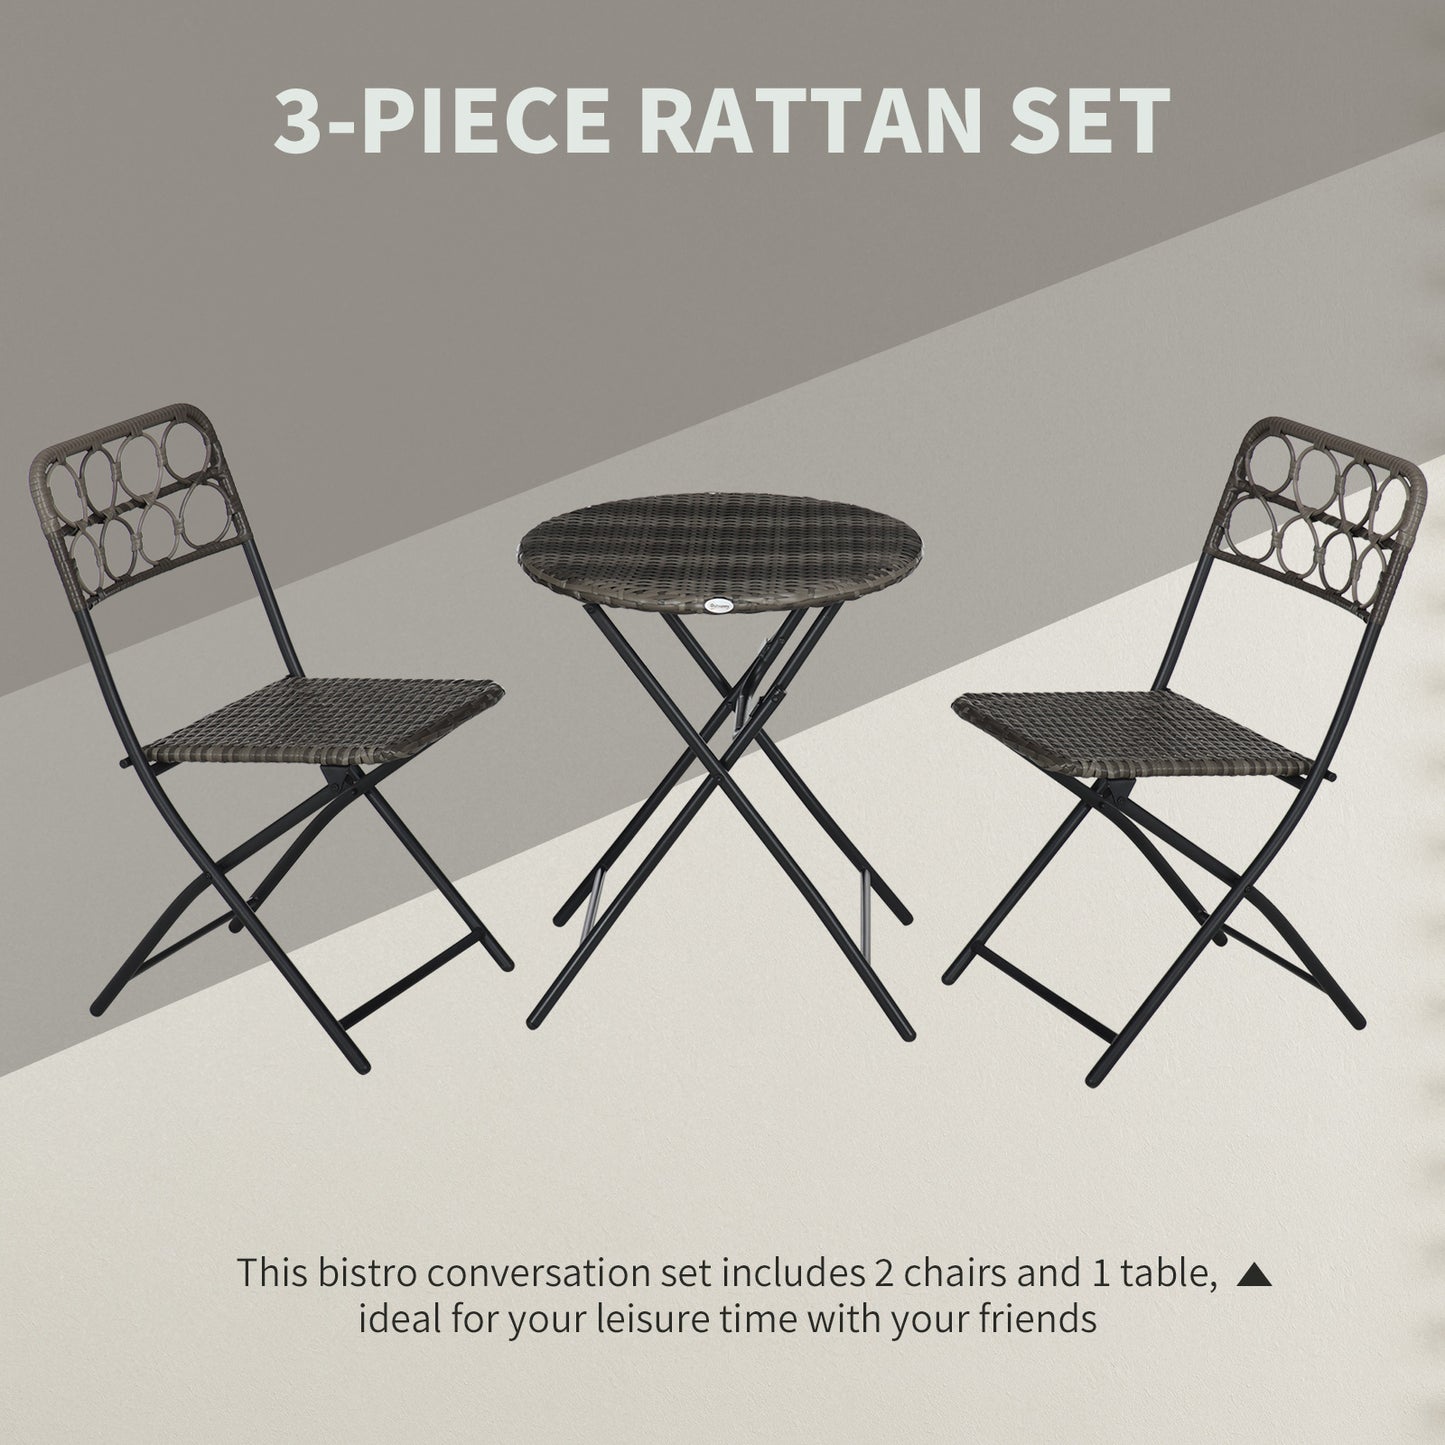 Outsunny Handwoven Rattan Bistro Set: 3-Piece Folding Chairs & Table, Coffee Set for Garden, Balcony & Poolside, Grey